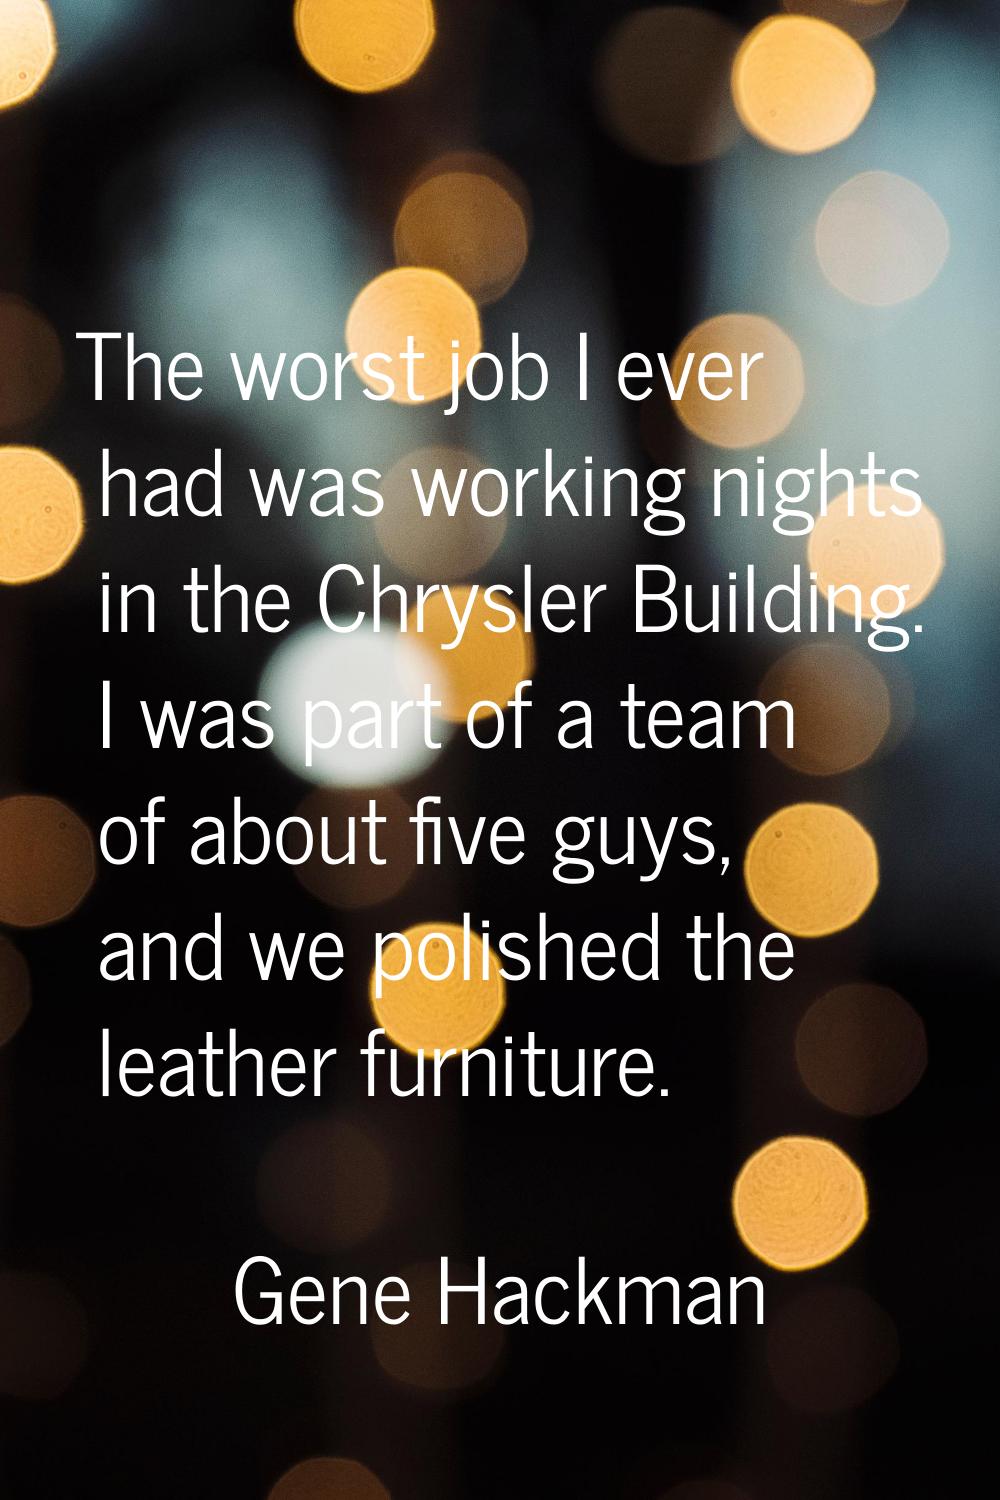 The worst job I ever had was working nights in the Chrysler Building. I was part of a team of about